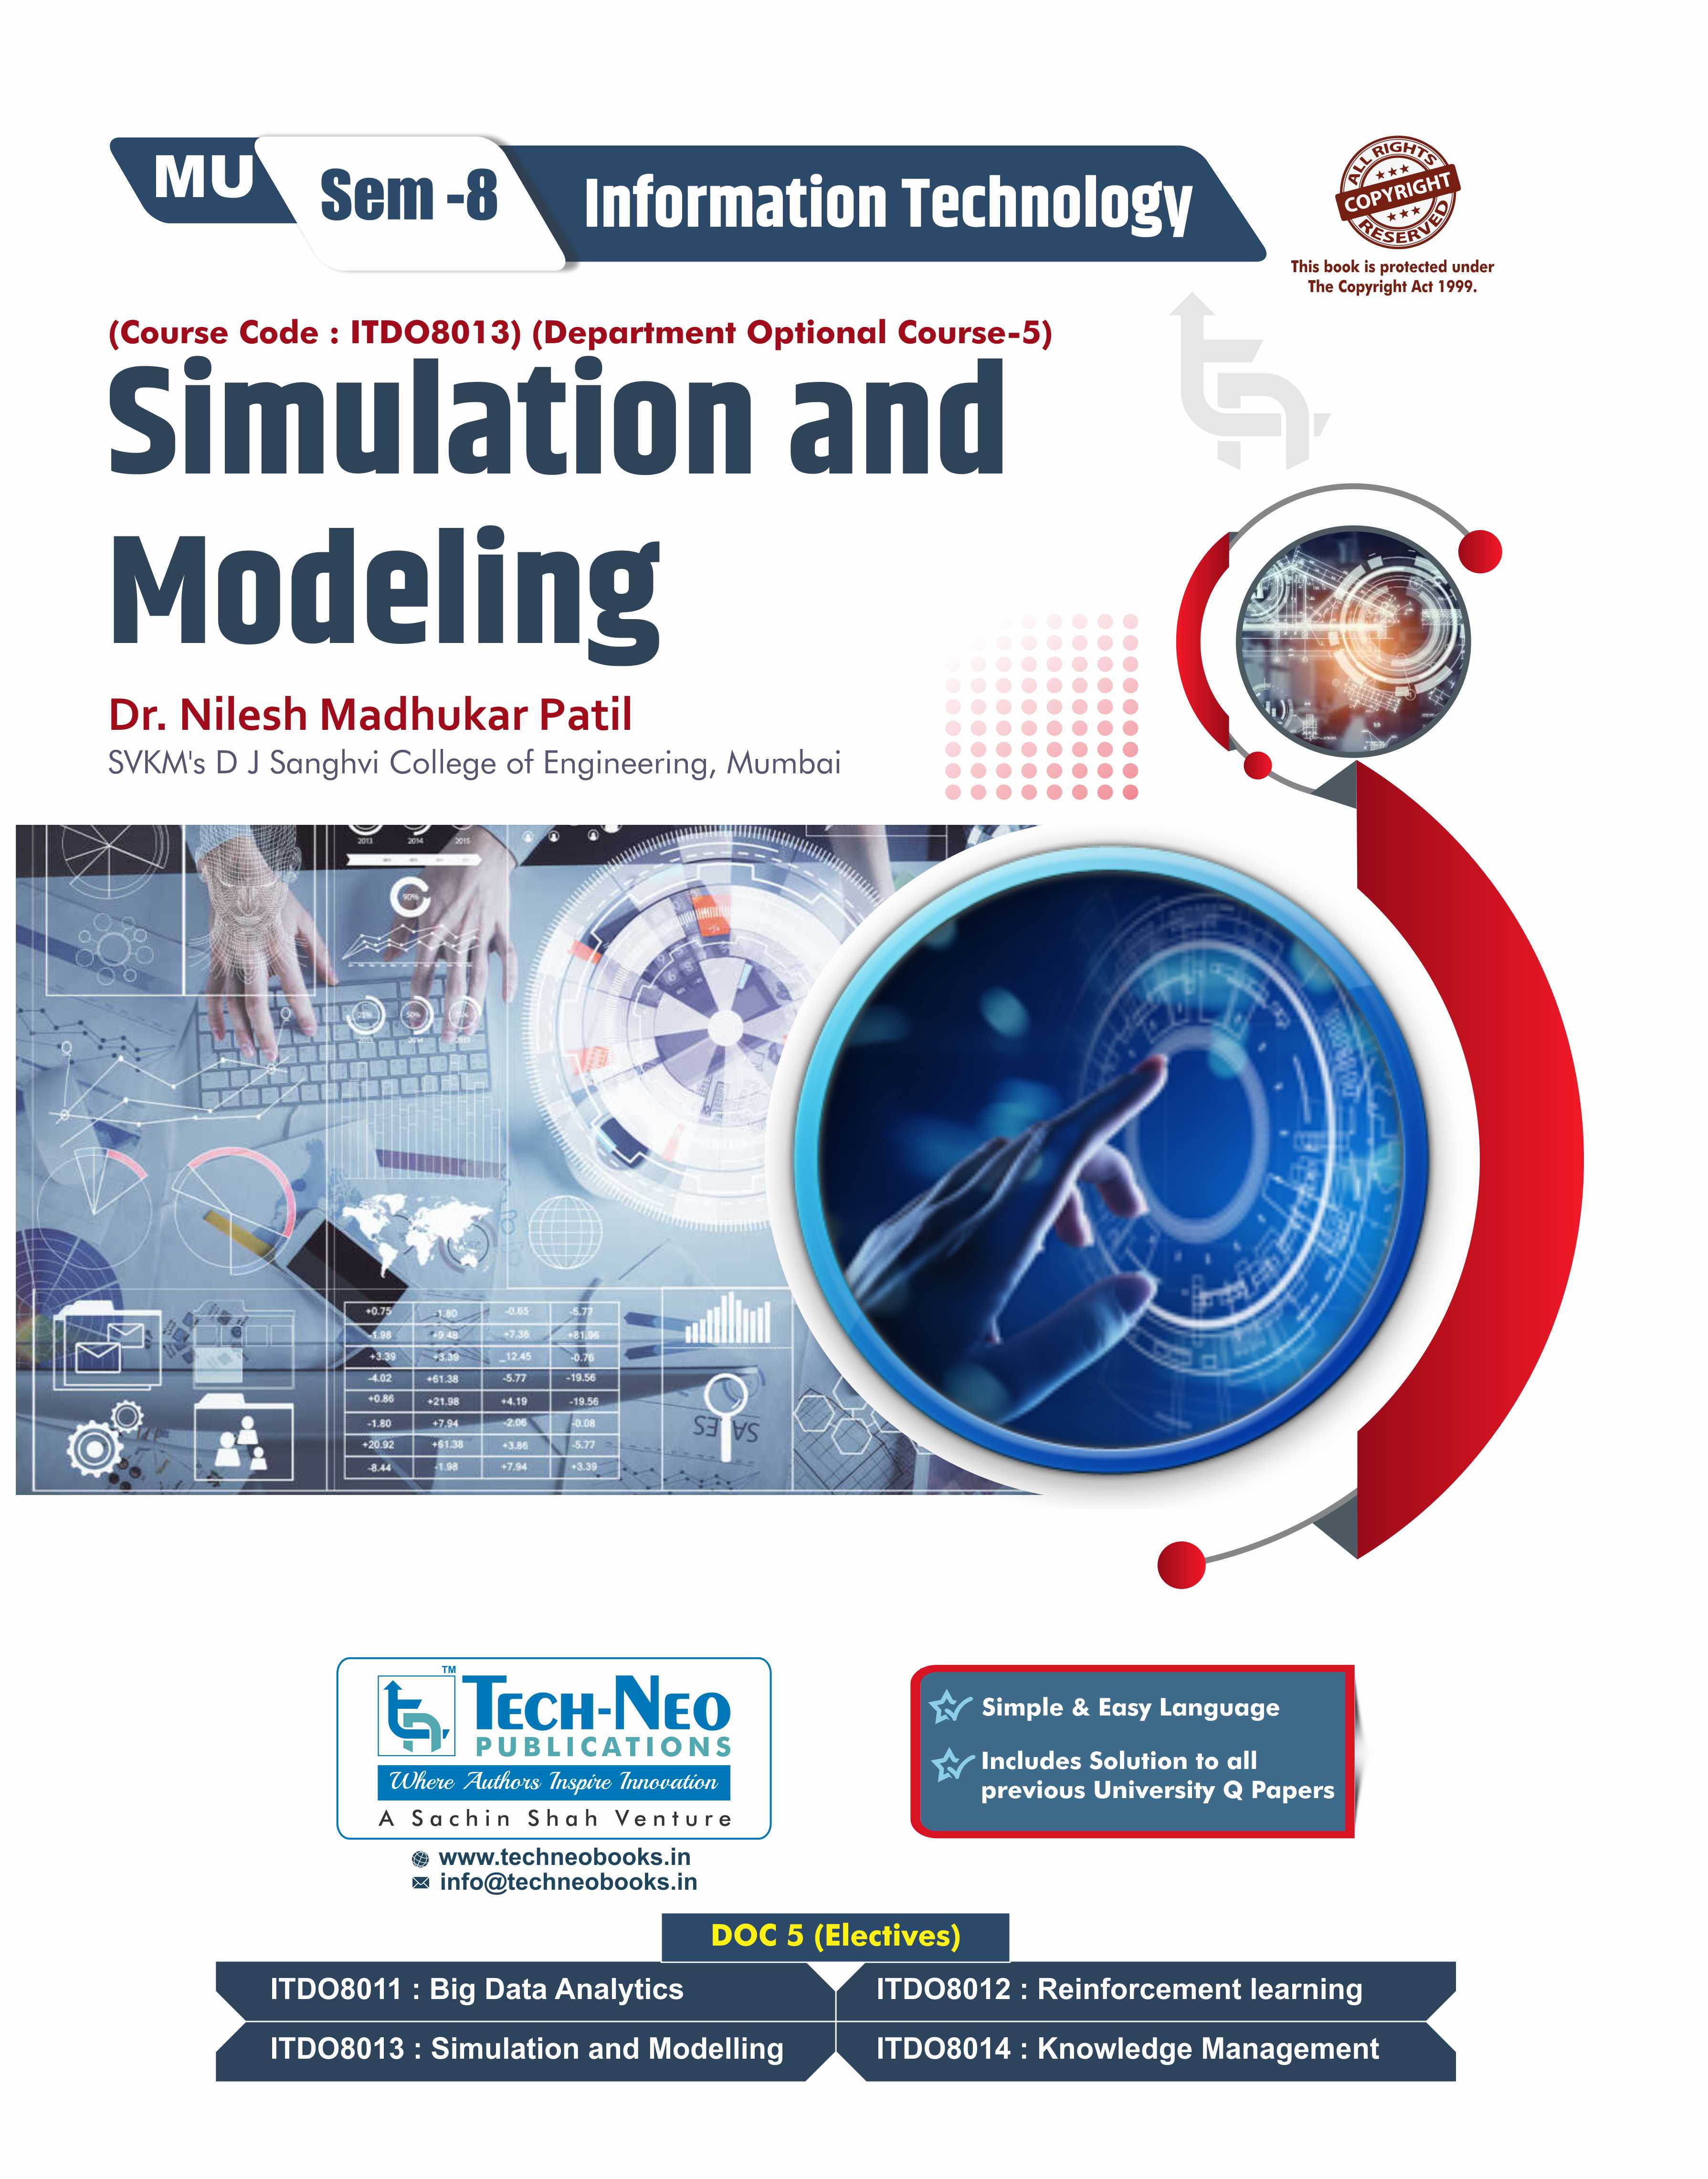 Simulation and Modeling